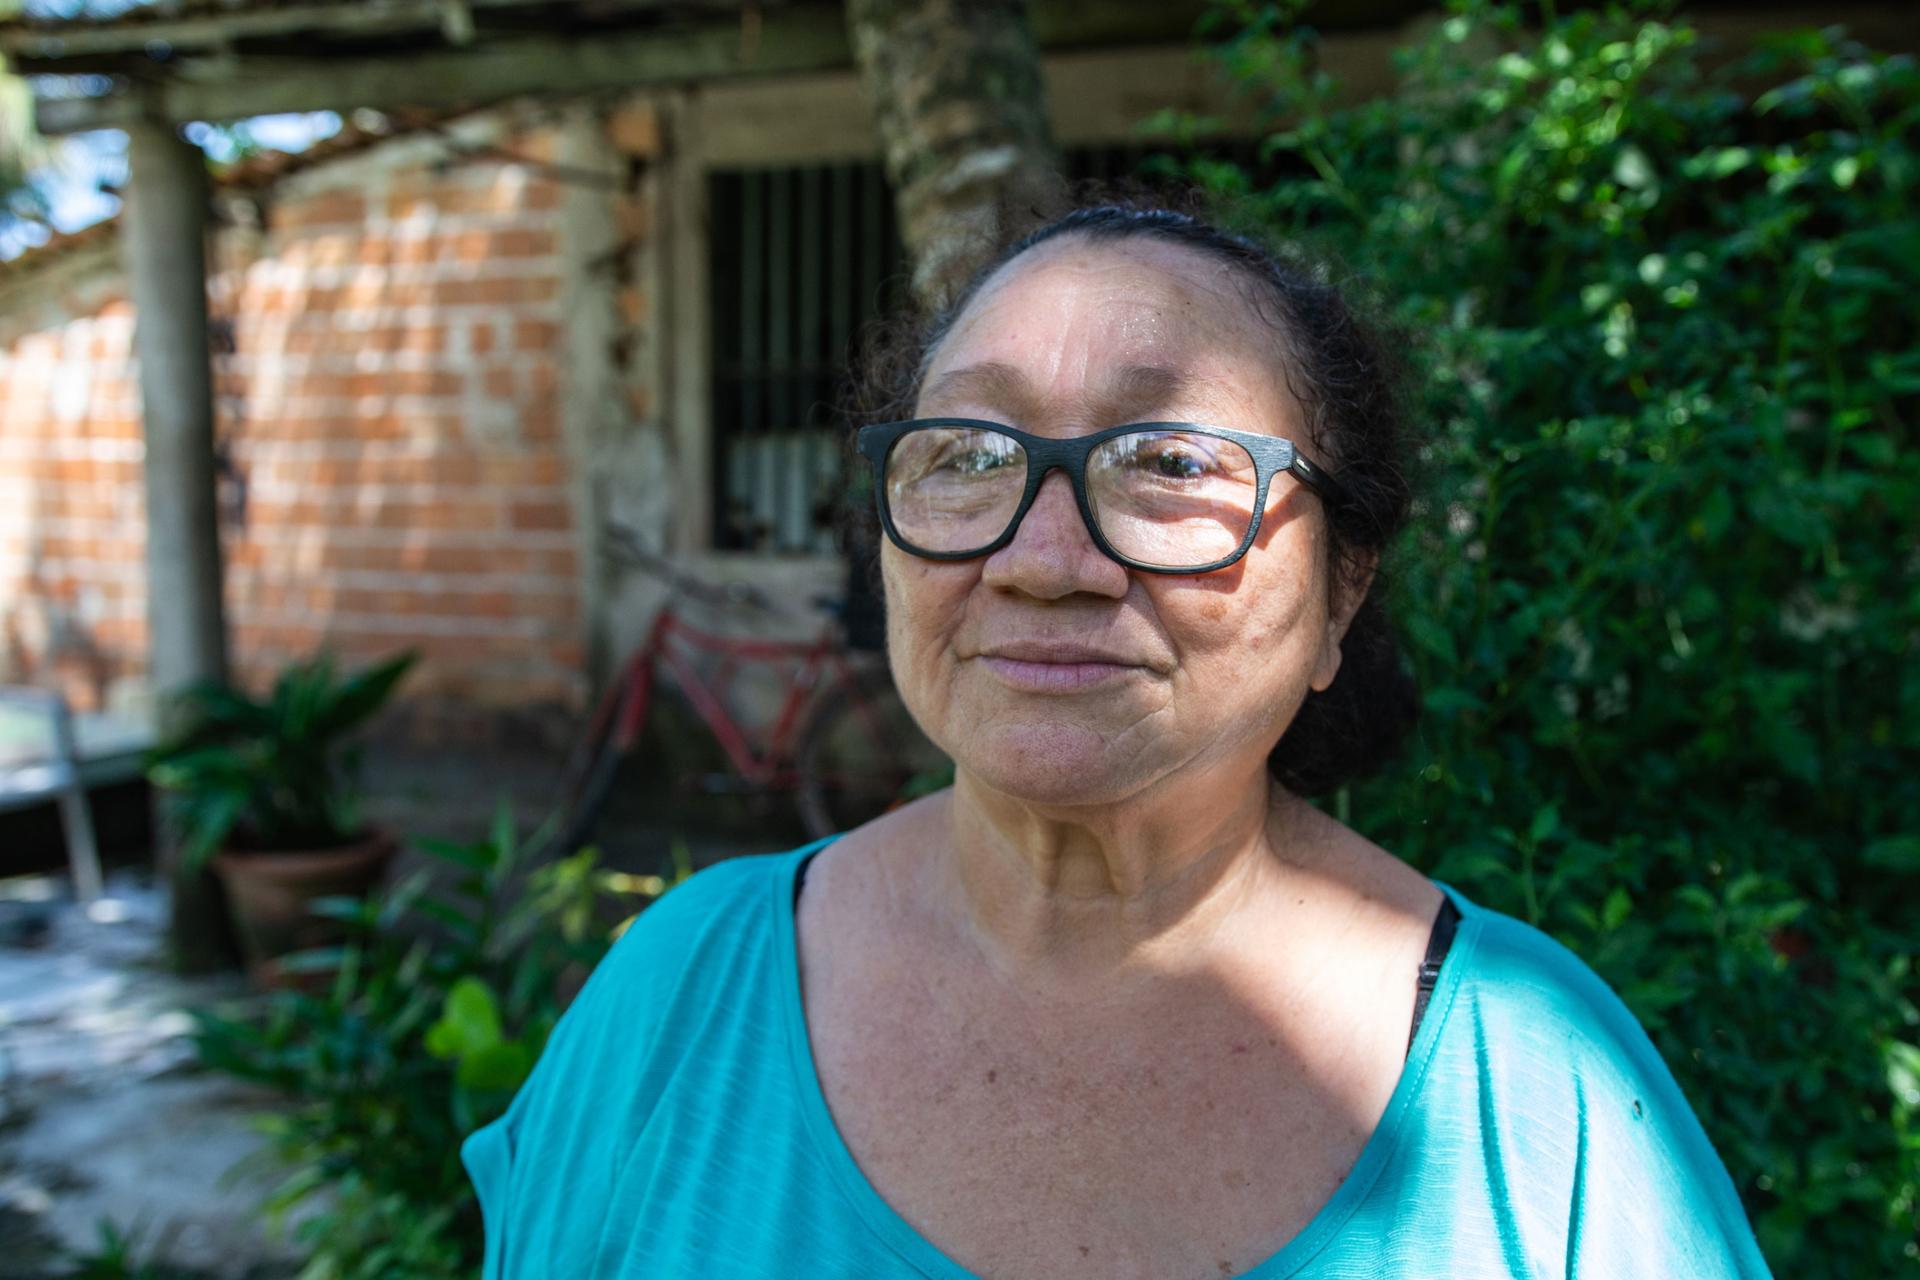 Célia Regina das Neves is a fisher and local leader within the Mãe Grande de Curuçá Extractive Reserve, a conservation area at the mouth of the Amazon River in Brazil. 